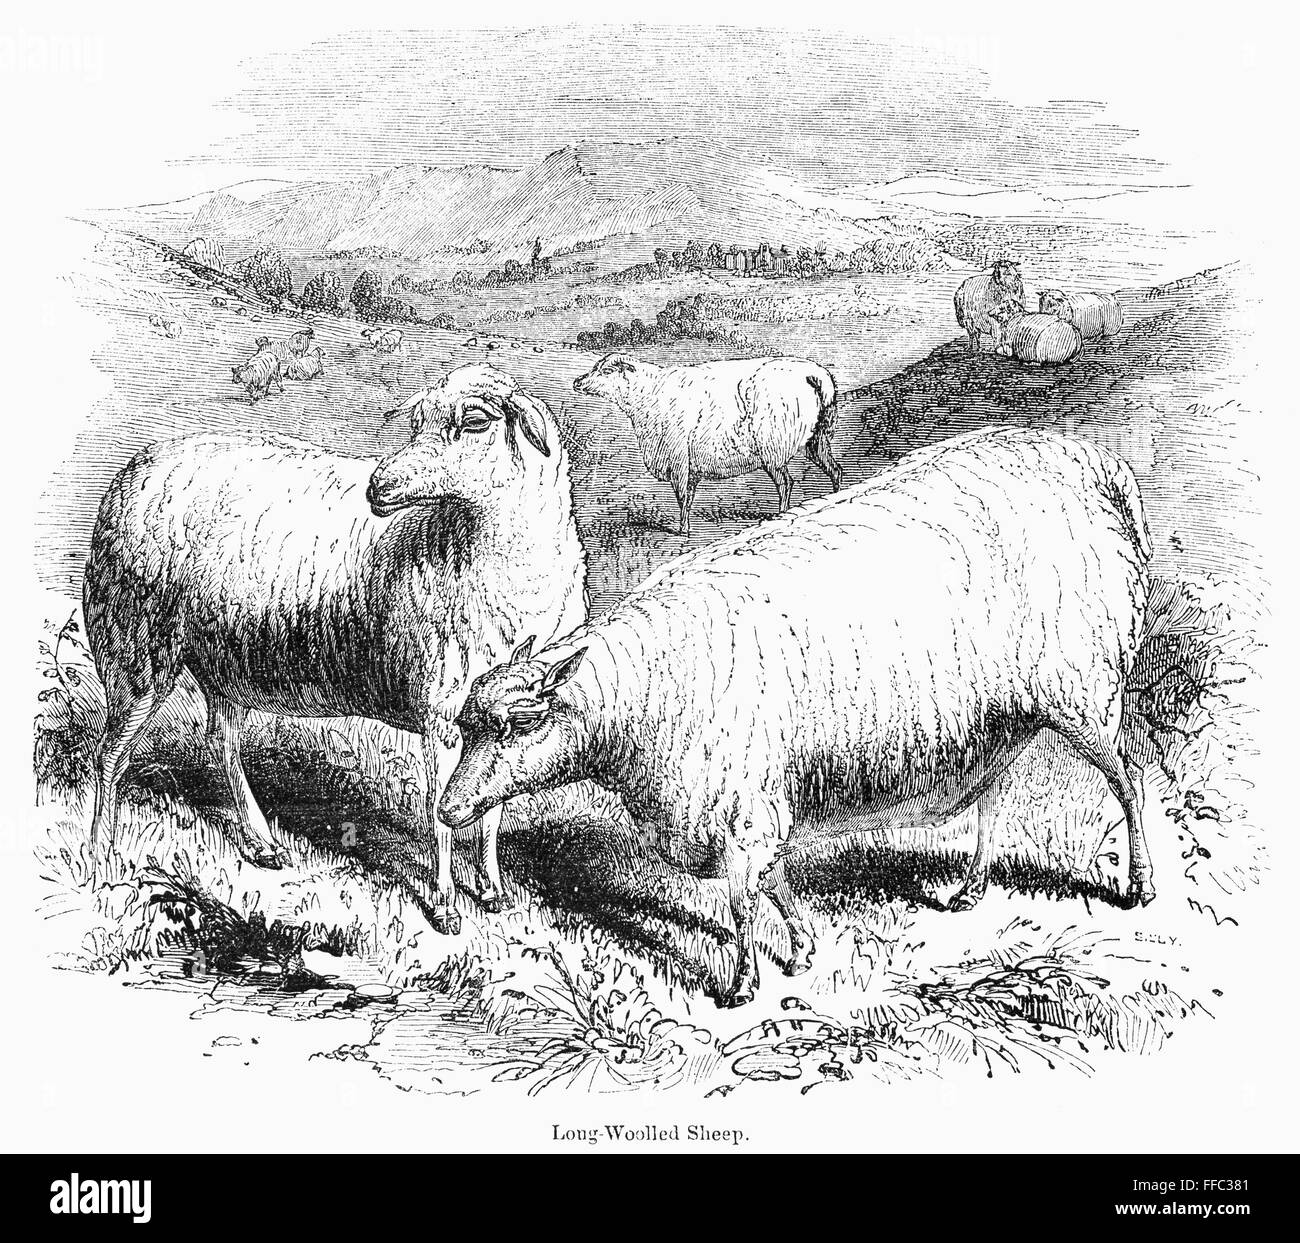 Une WOOLLED Mouton, 1841. /NWood gravure, anglais, 1841. Banque D'Images